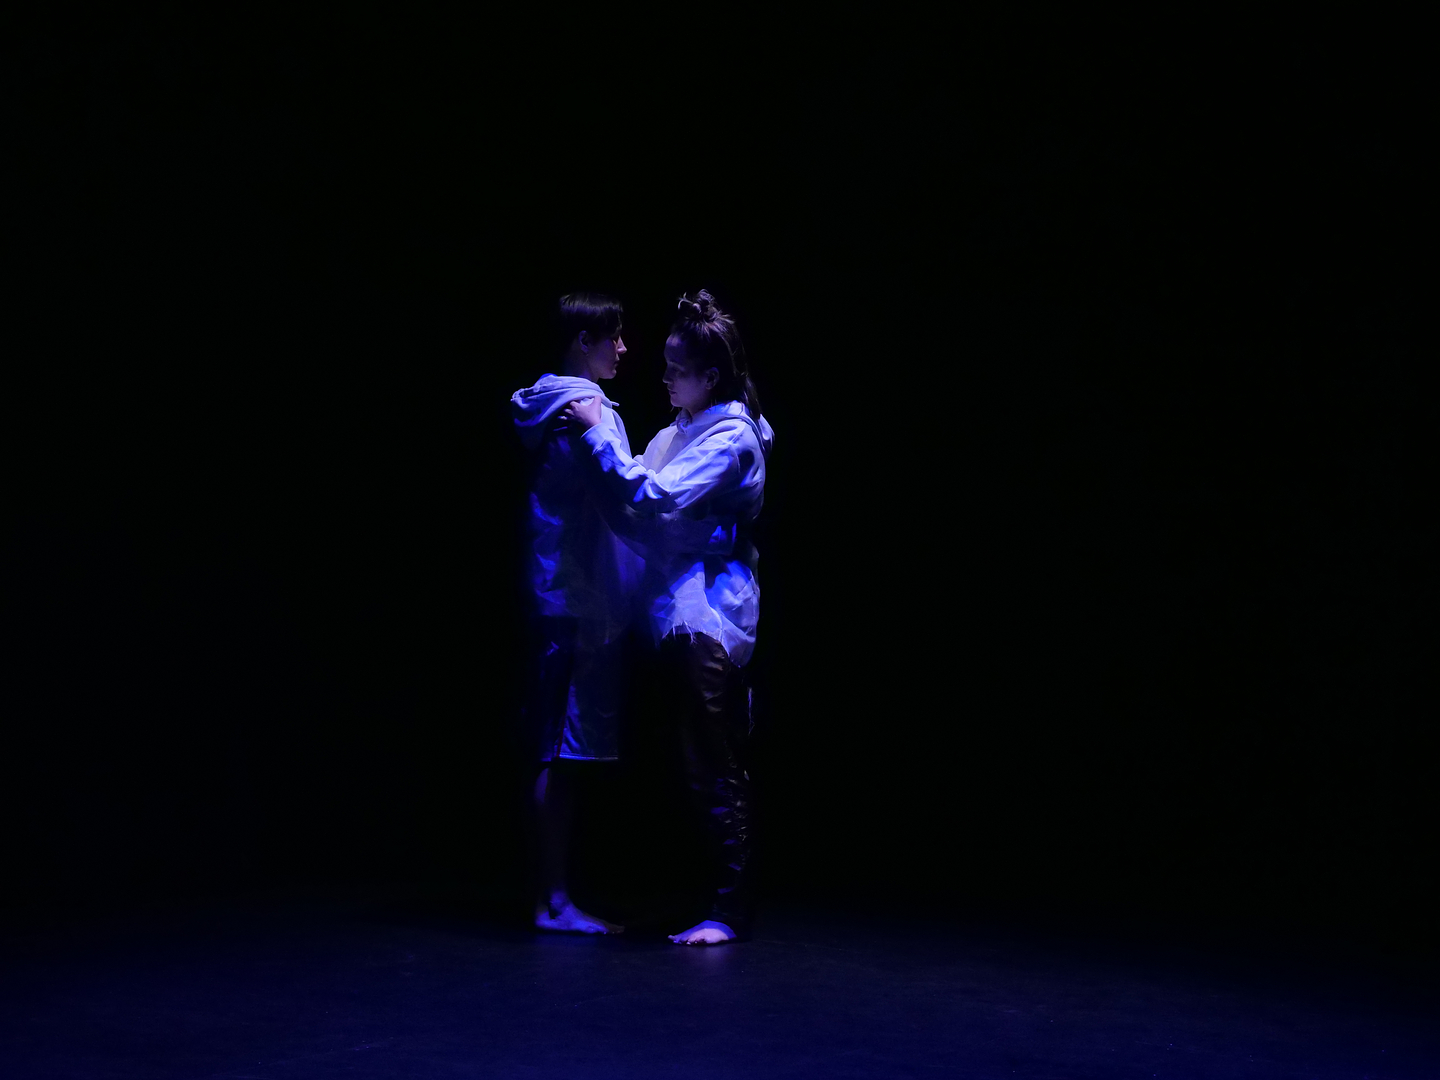 Two people stand facing each other in profile in a dark, purple space that looks like it goes on forever.  Their hands rest on each others’ shoulders. They wear white hooded sweatshirts. Their feet and legs are shadowed while their faces and torsos are illuminated by blue-white light. 